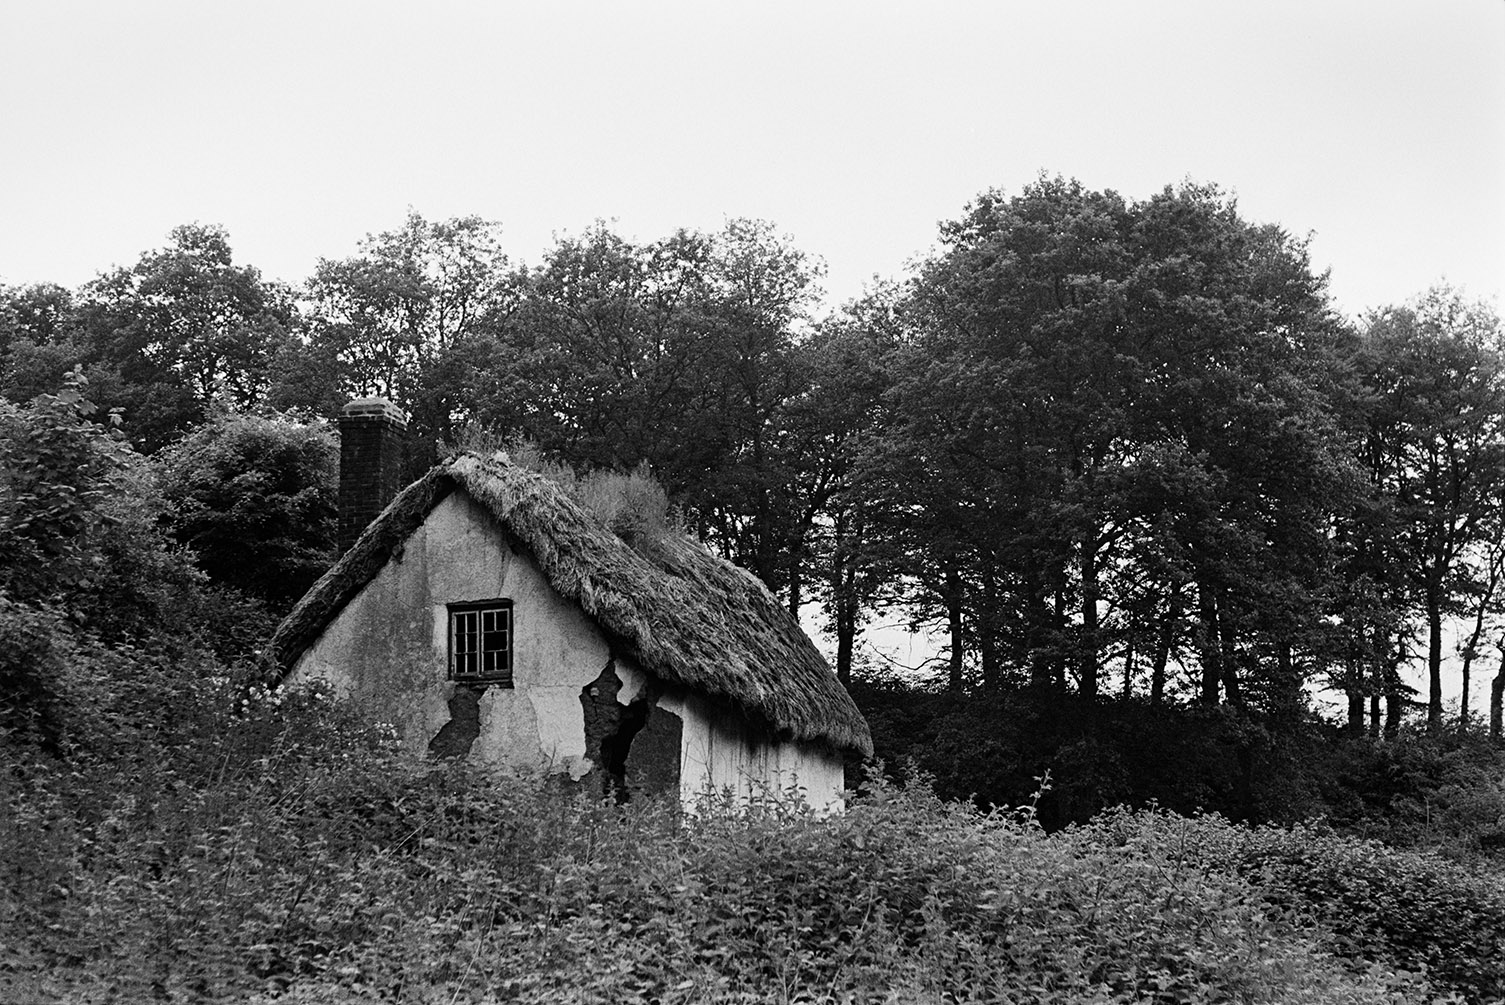 A derelict cob and thatch cottage surrounded by trees near Westleigh. The cottage is over grown and has a large crack running down one wall.